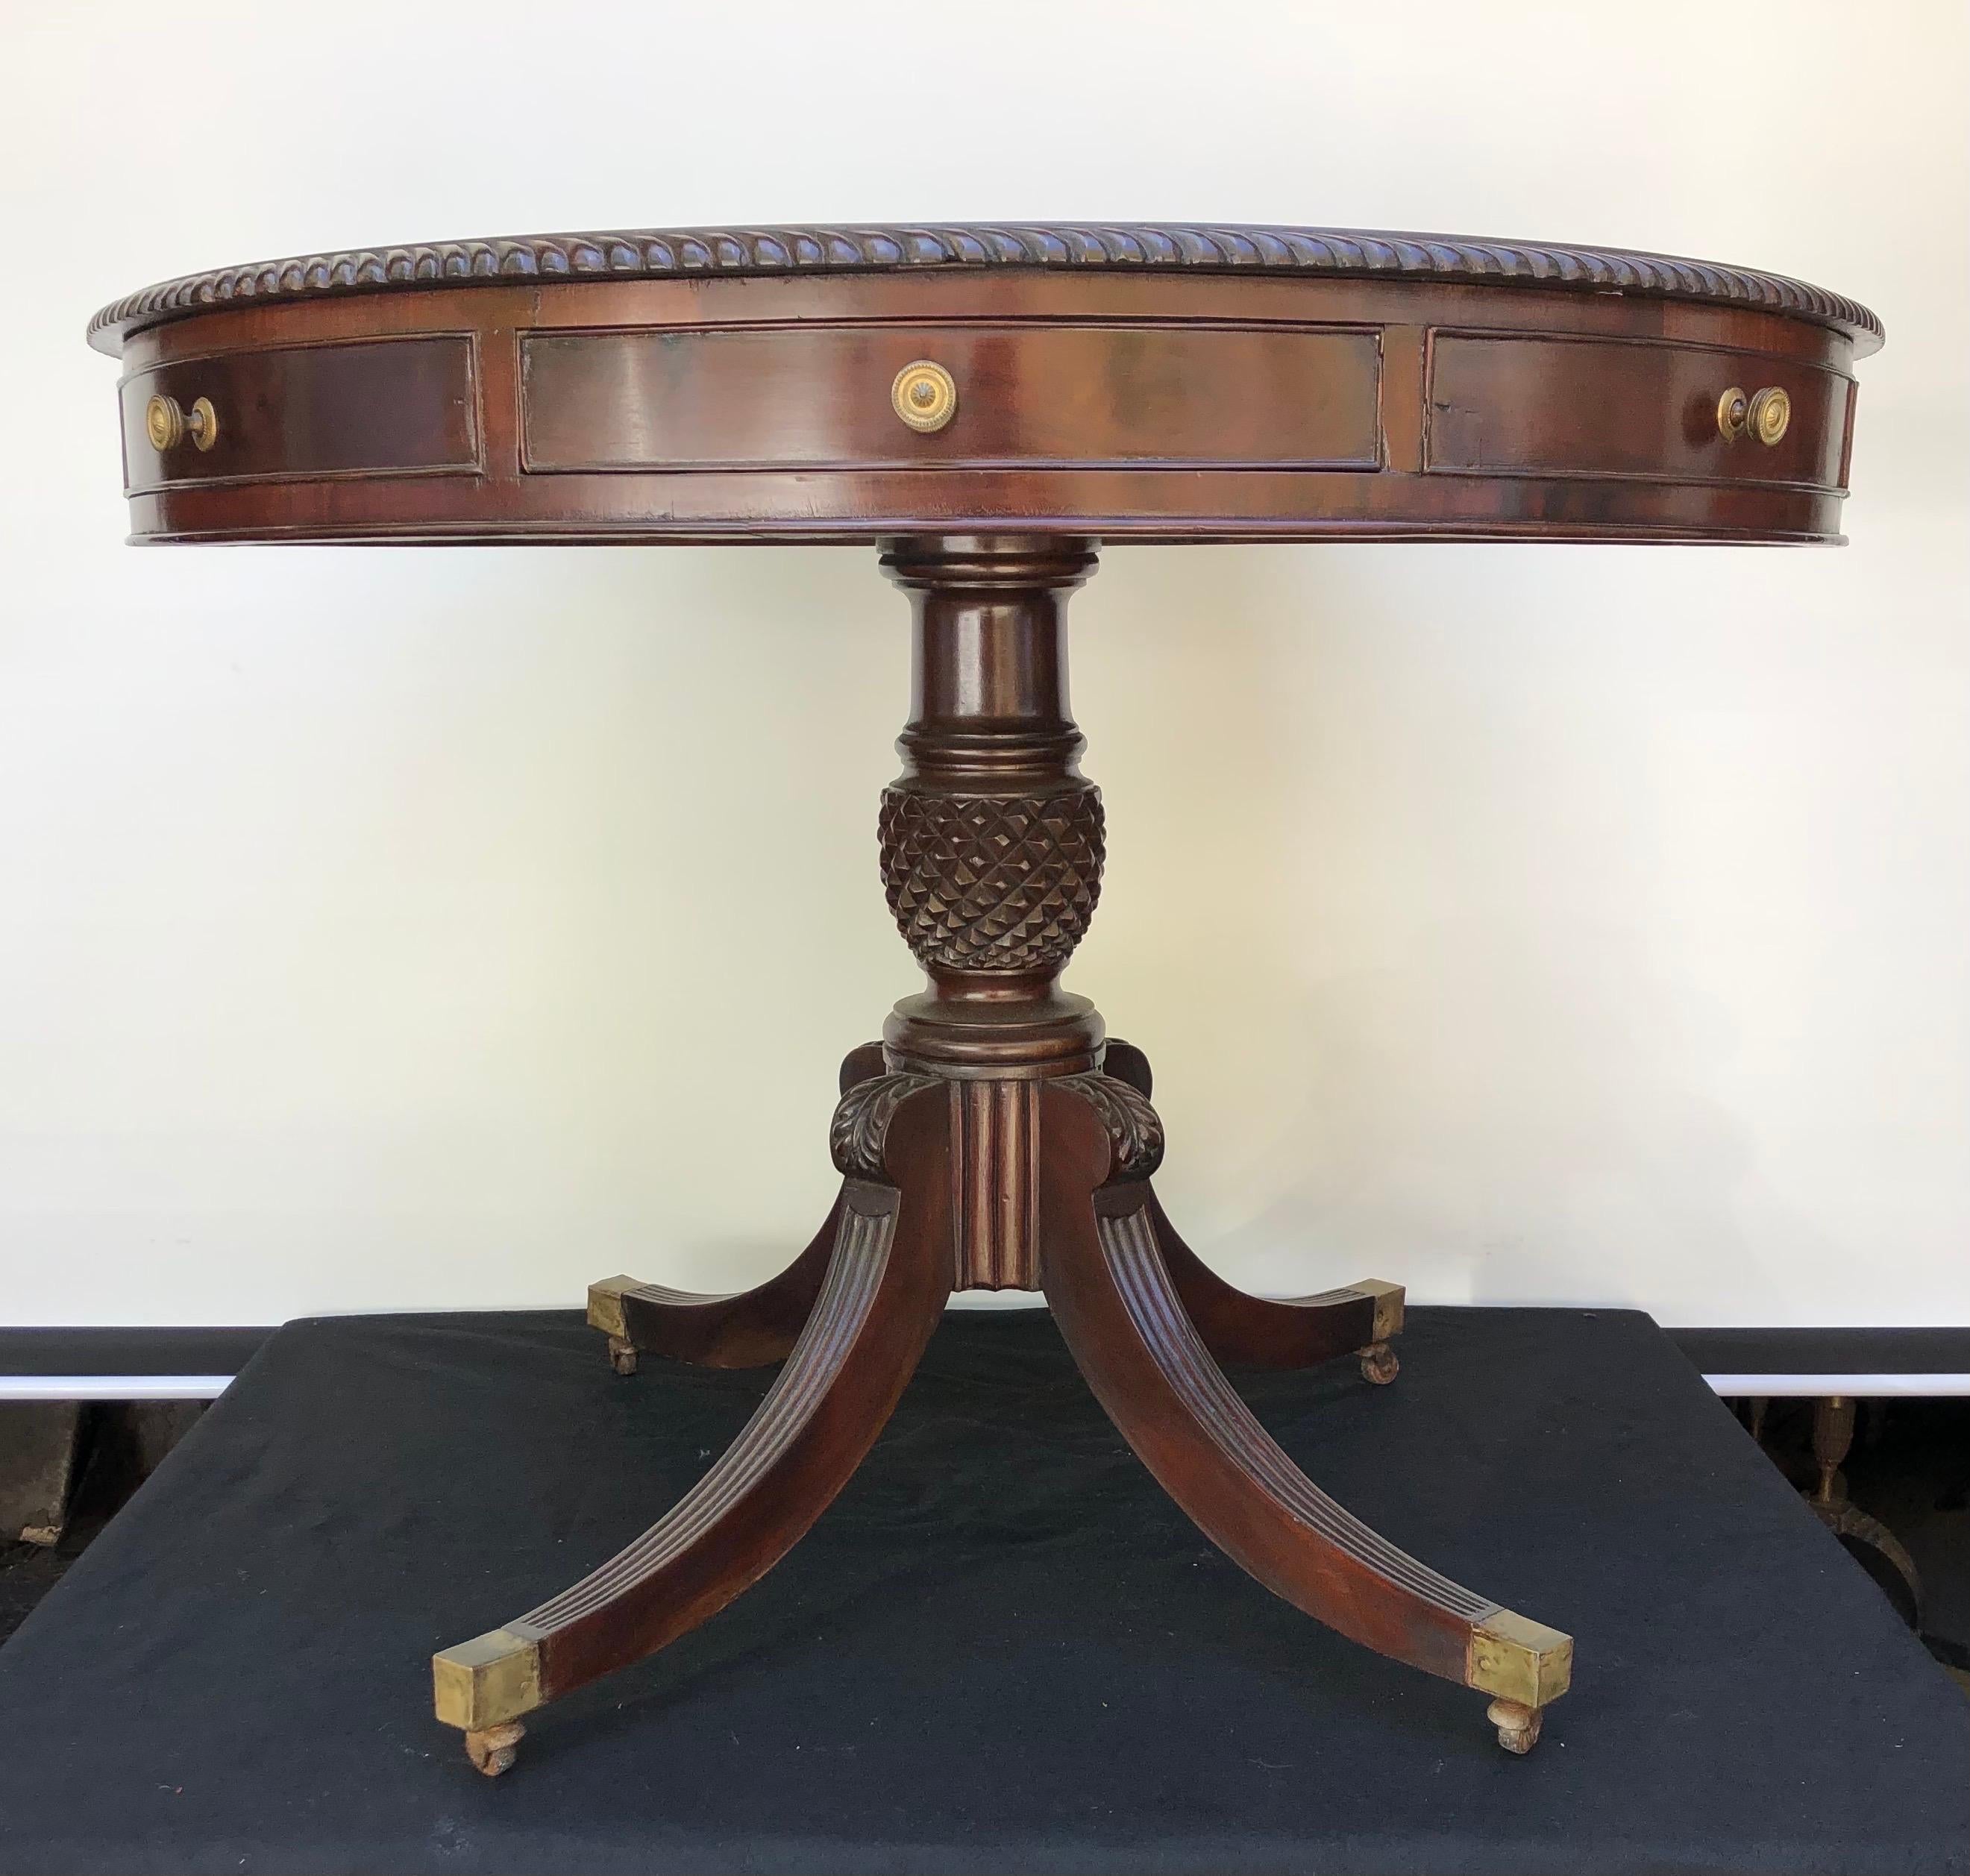 Sophisticated Jamaican Regency pineapple carved pedestal table was hand made in the 19th Century using the finest solid mahogany. The West Indies Table is in the form of a Rent Table with eight drawers (four faux drawers and four working). The top